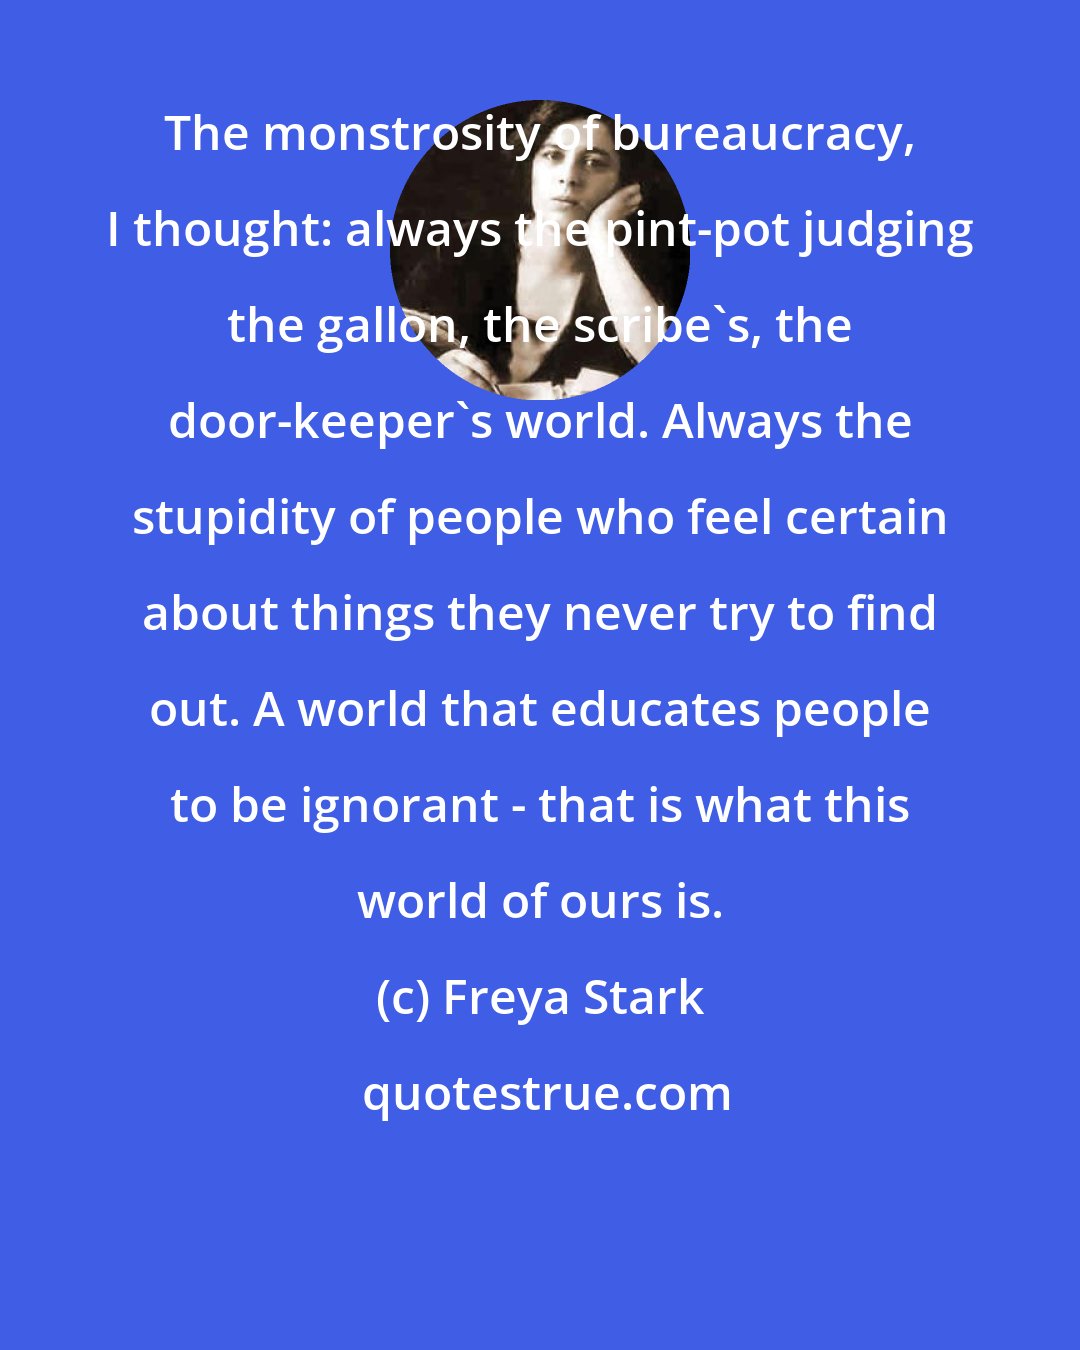 Freya Stark: The monstrosity of bureaucracy, I thought: always the pint-pot judging the gallon, the scribe's, the door-keeper's world. Always the stupidity of people who feel certain about things they never try to find out. A world that educates people to be ignorant - that is what this world of ours is.